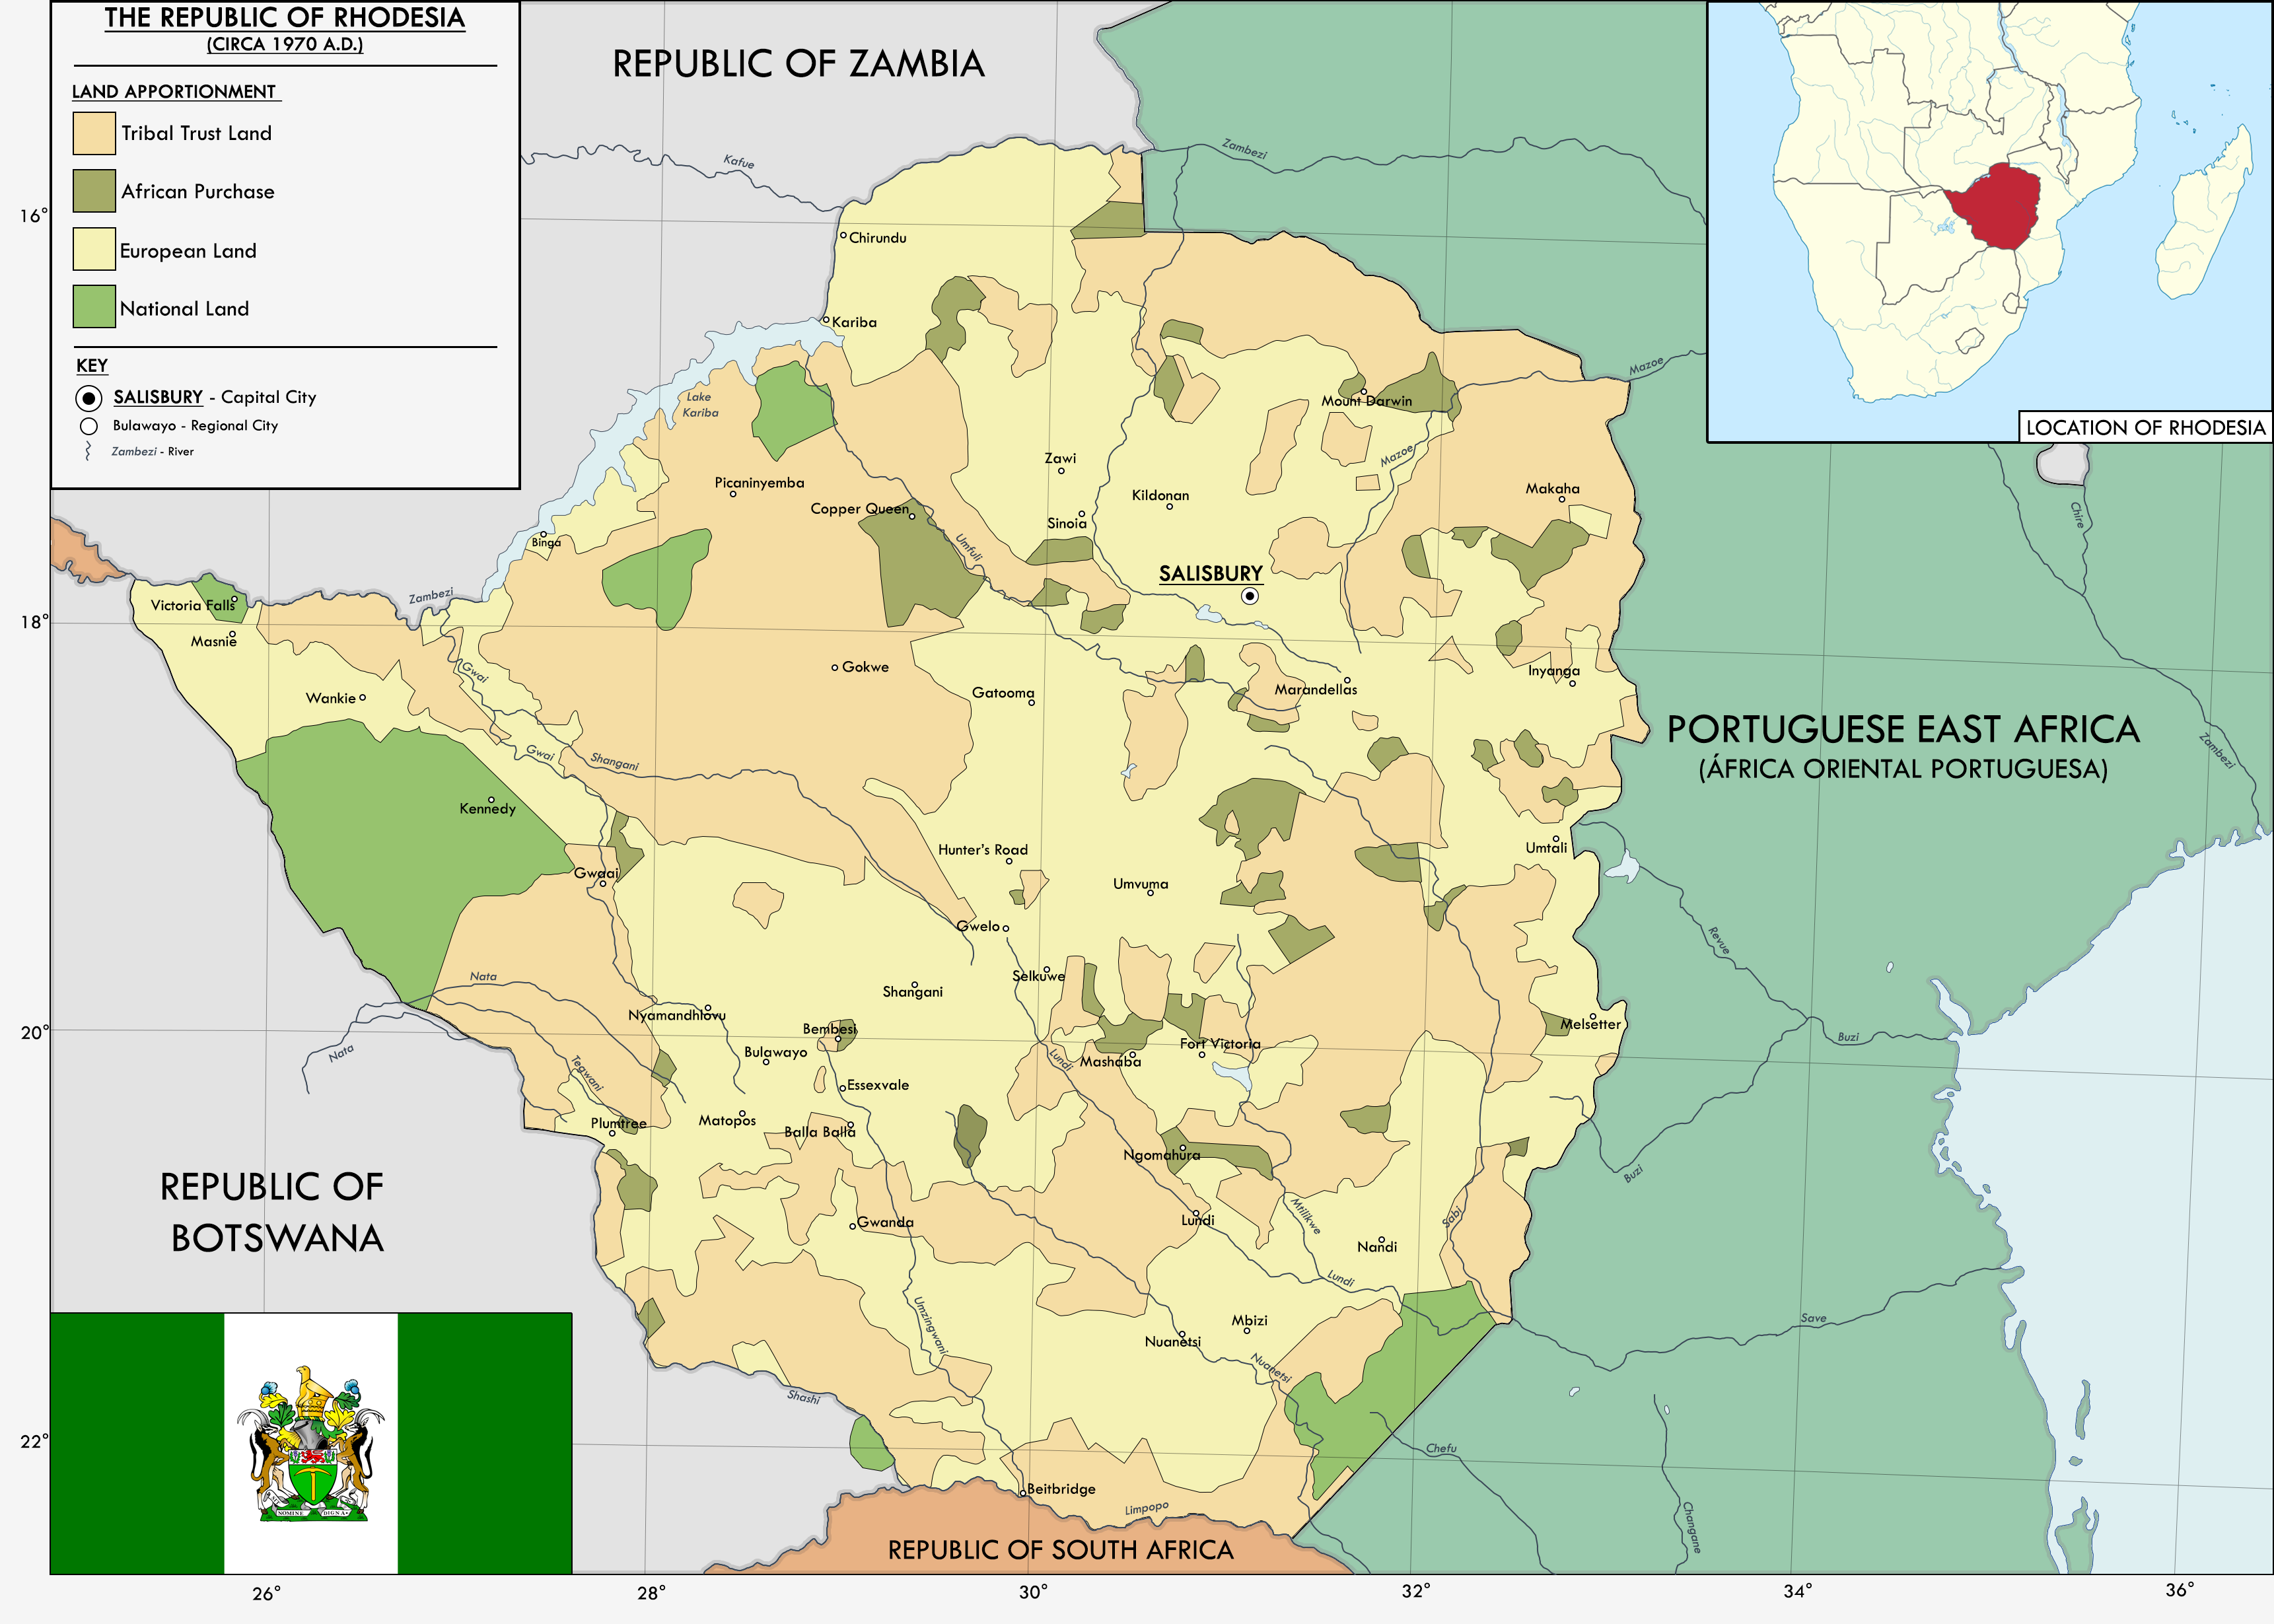 map_of_rhodesia_land_apportionment___1970_a_d___by_kitfisto1997-dc3n5ye.png